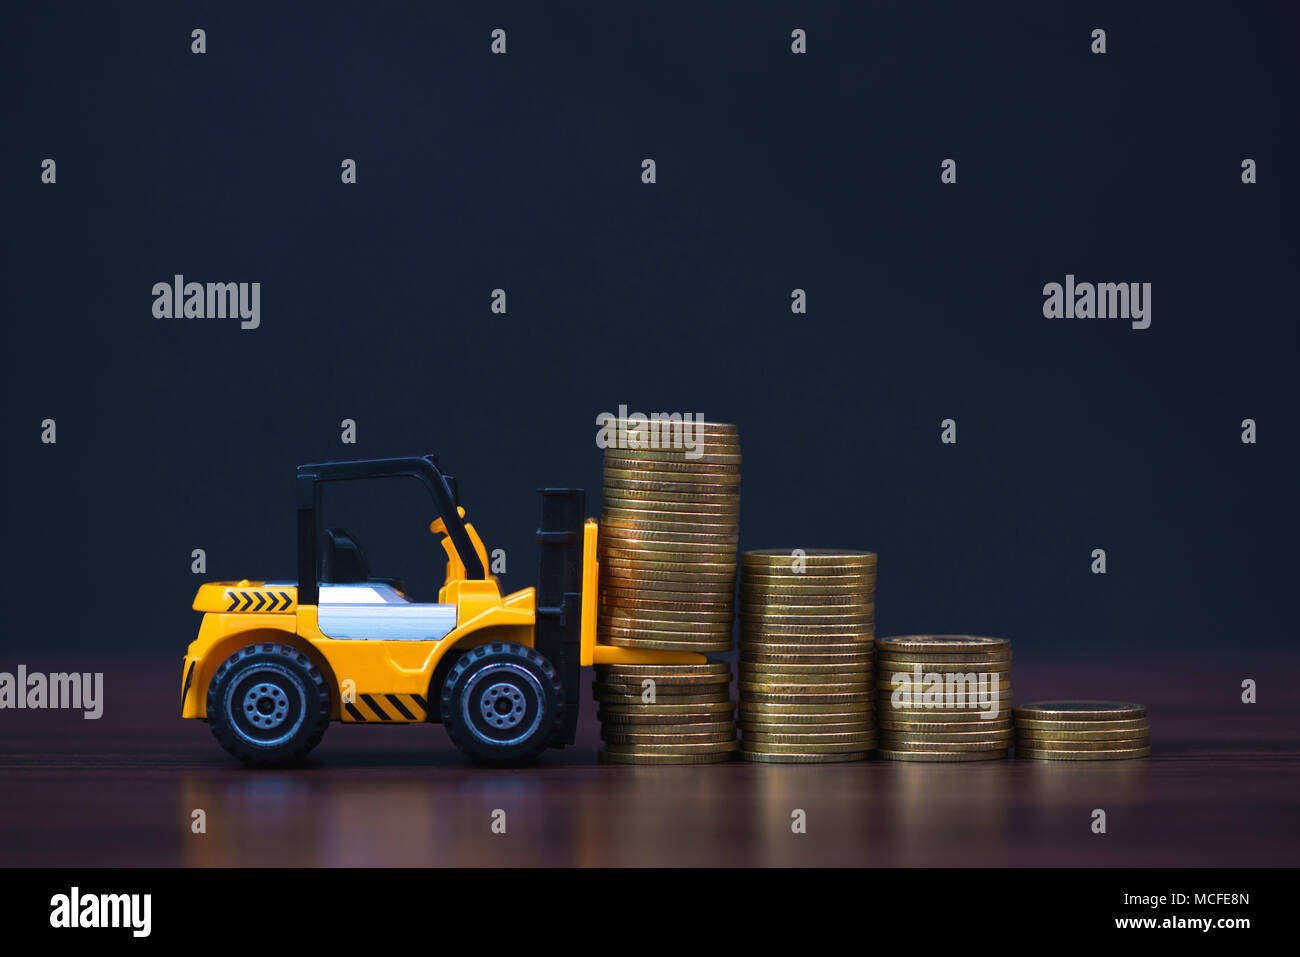 Mini Forklift Truck Loading Stack Coin With Steps Of Gold Coin In Dark Business Finance And Banking Industrial Concept Idea Stock Photo Alamy